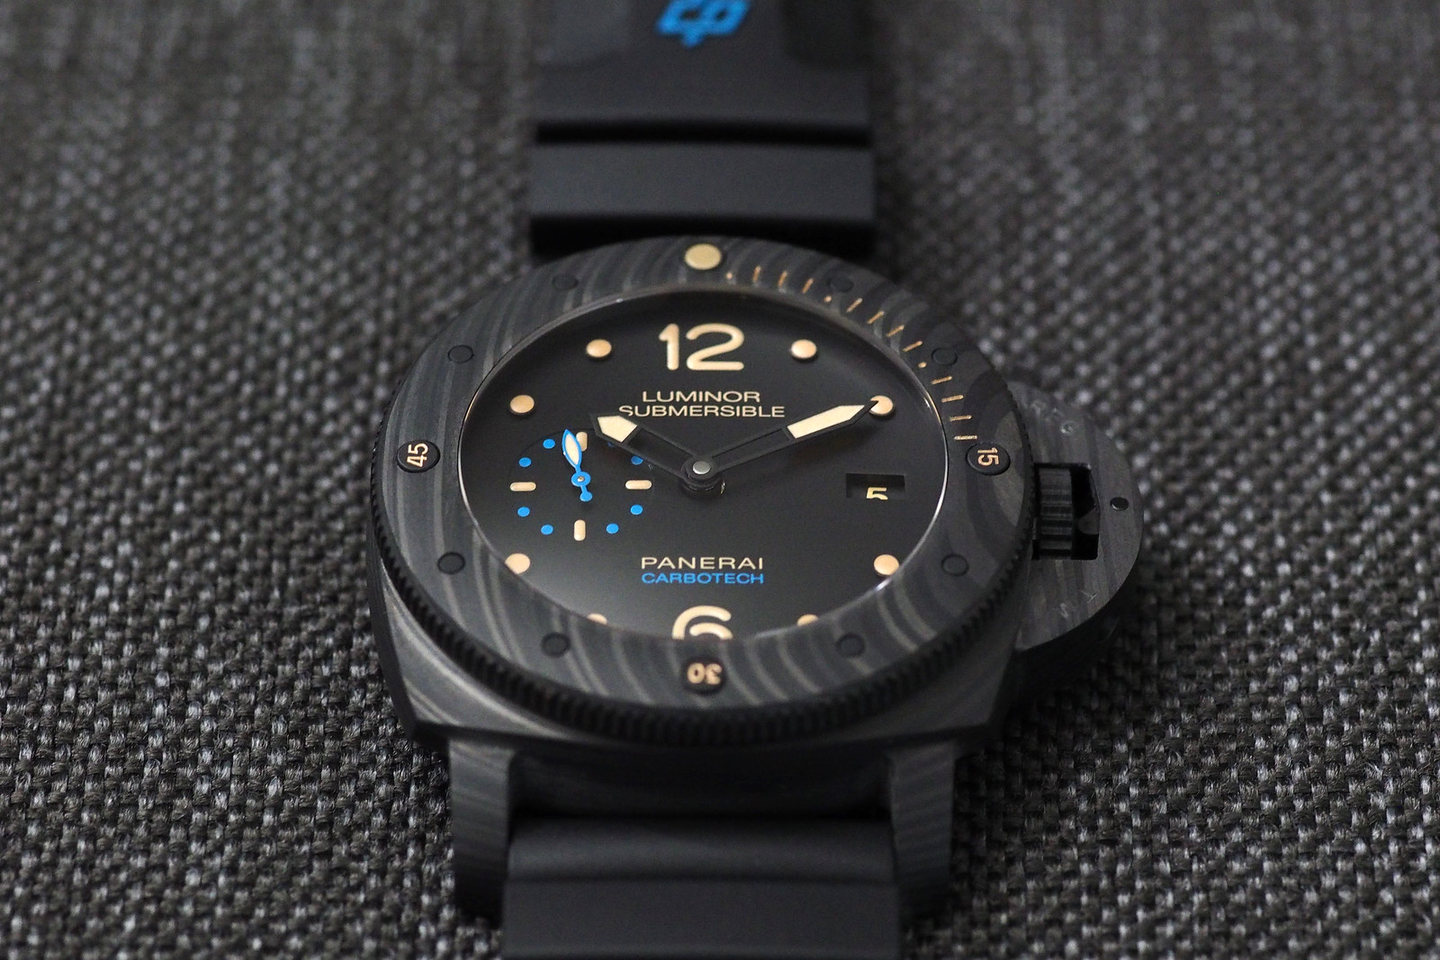 REVIEW: Luminor Submersible 1950 Carbotech 3 Days Automatic